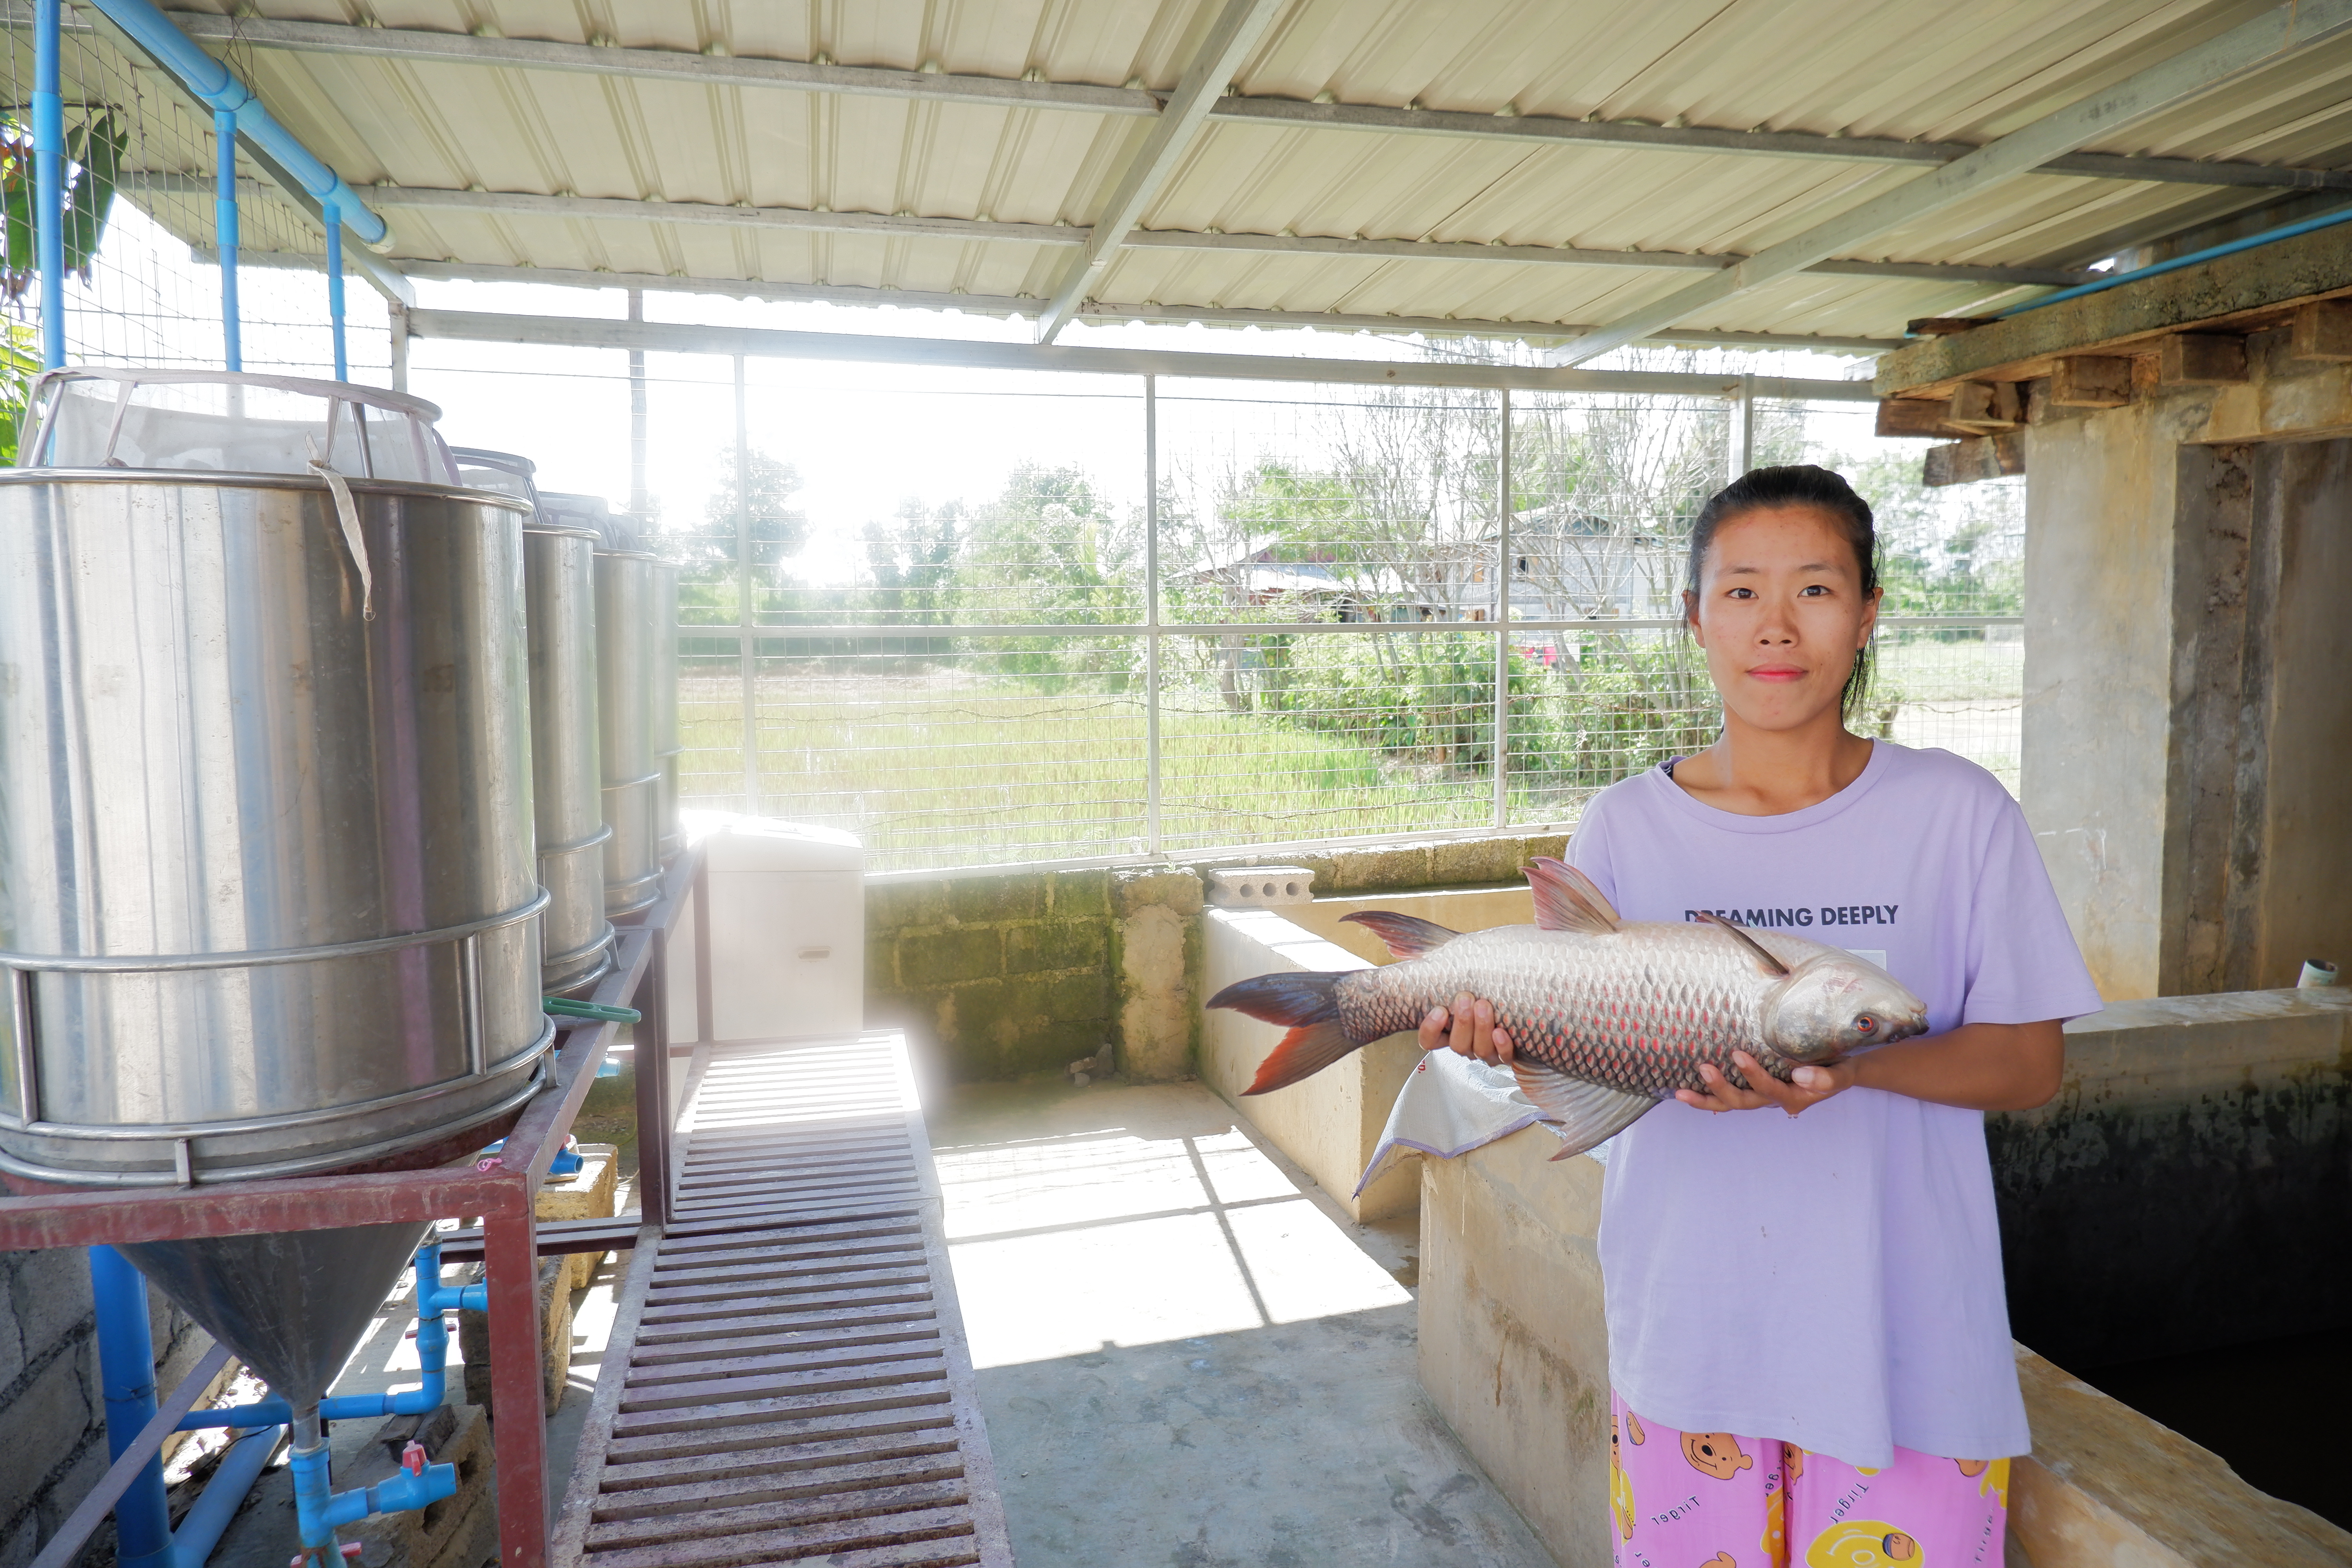 Besides running the hatchery business, Nan Win Htwe has now diversified her family business to include producing aquatic foods for consumption and additional income for her family